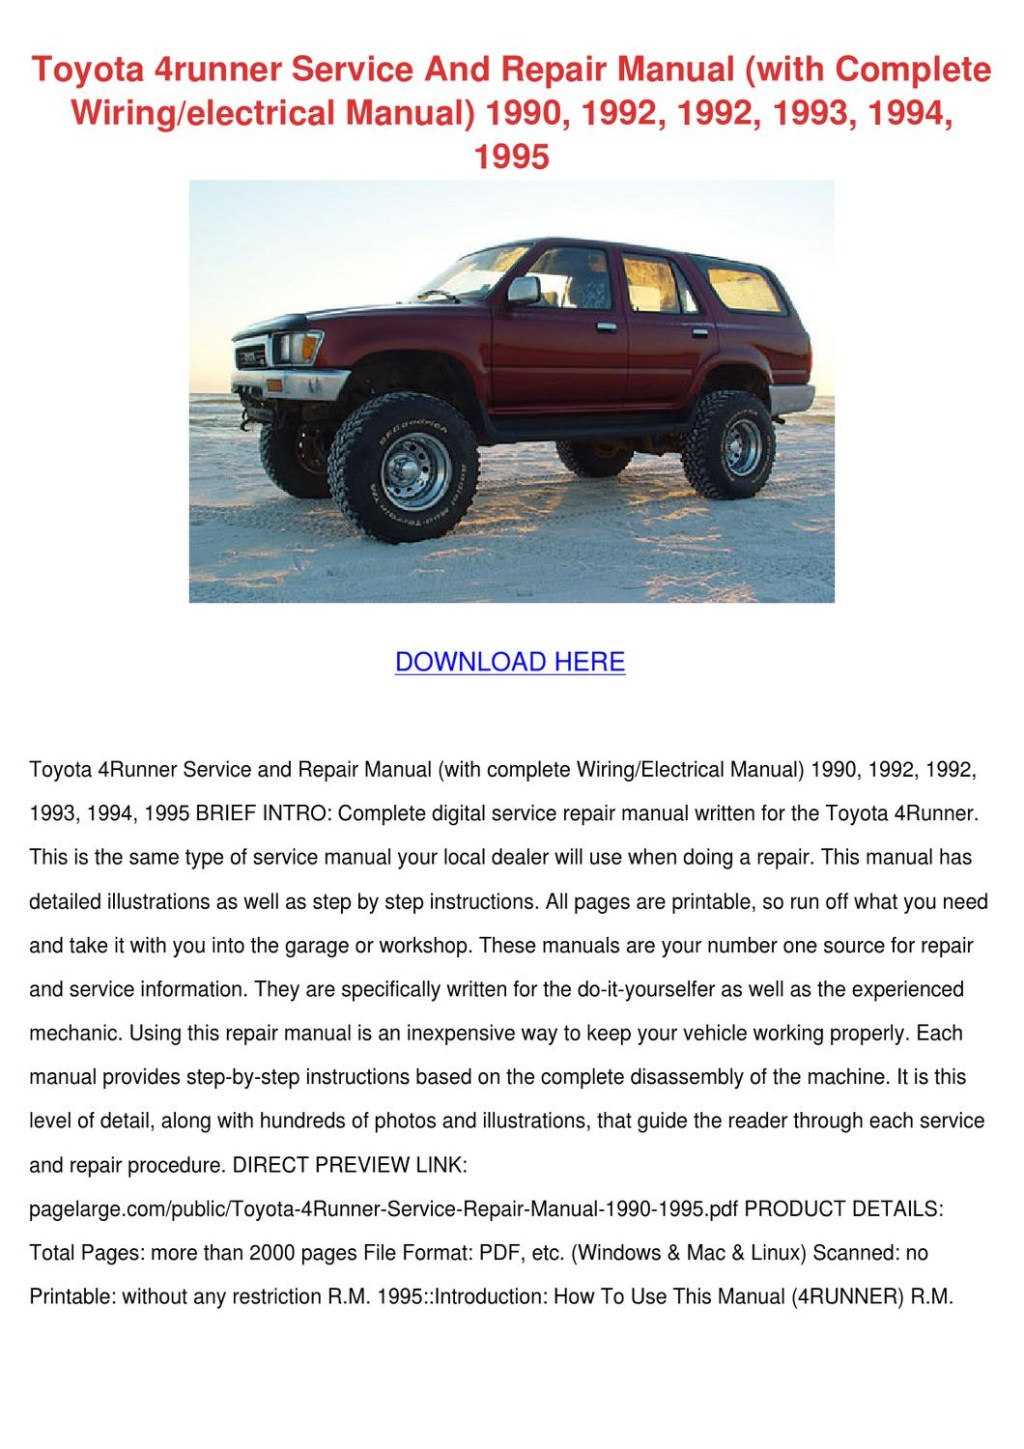 Picture of: Toyota runner Service And Repair Manual With by Carlene Aggarwal